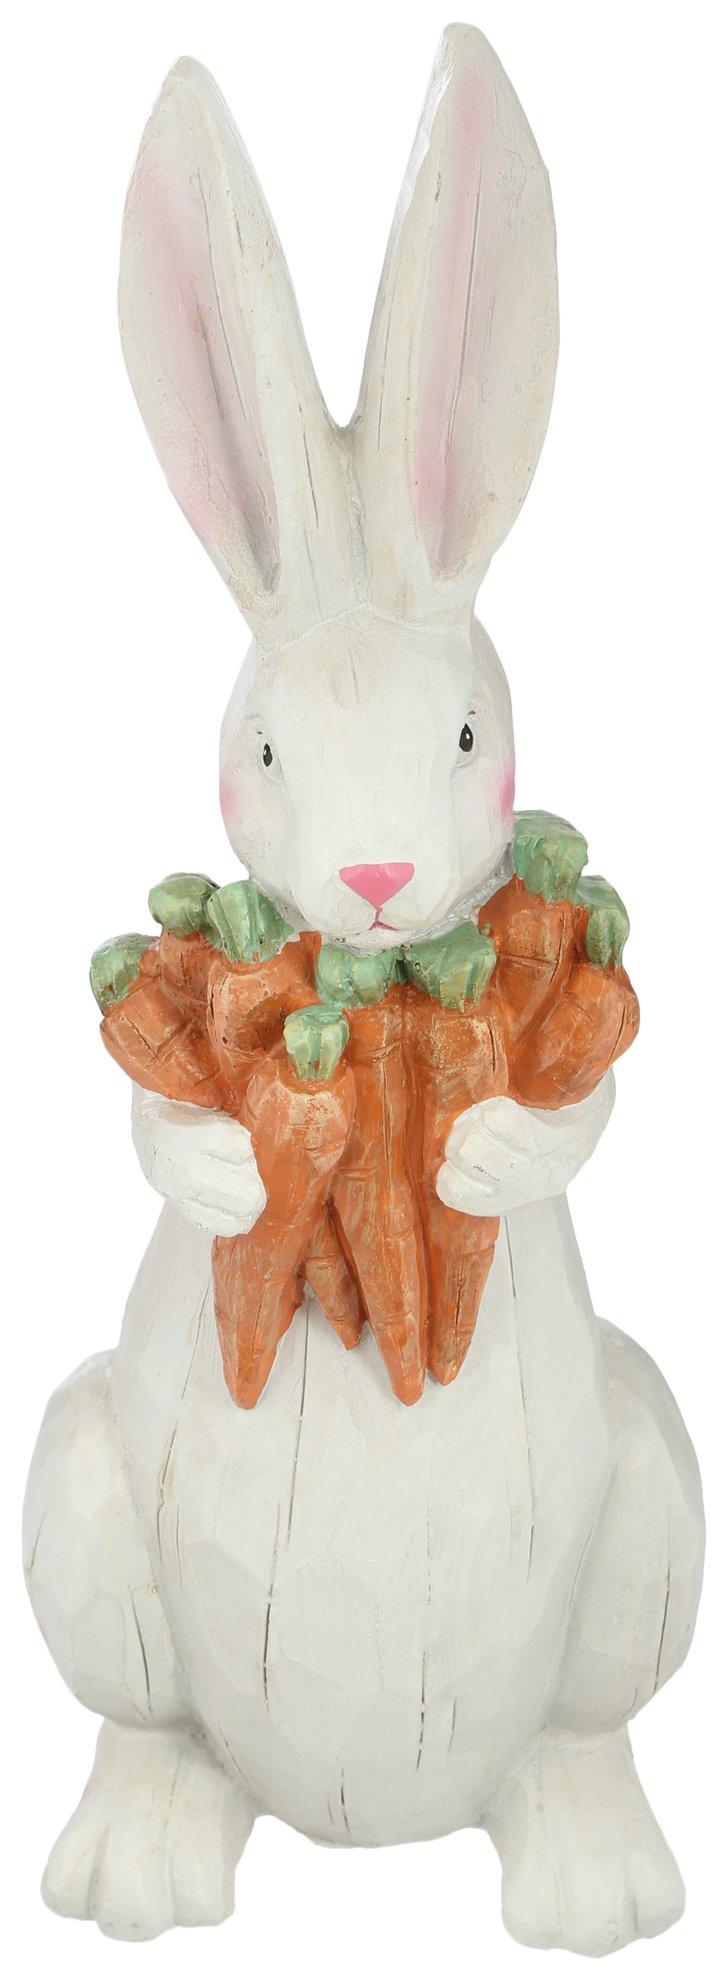 18in Resin Carved Style Bunny Decor